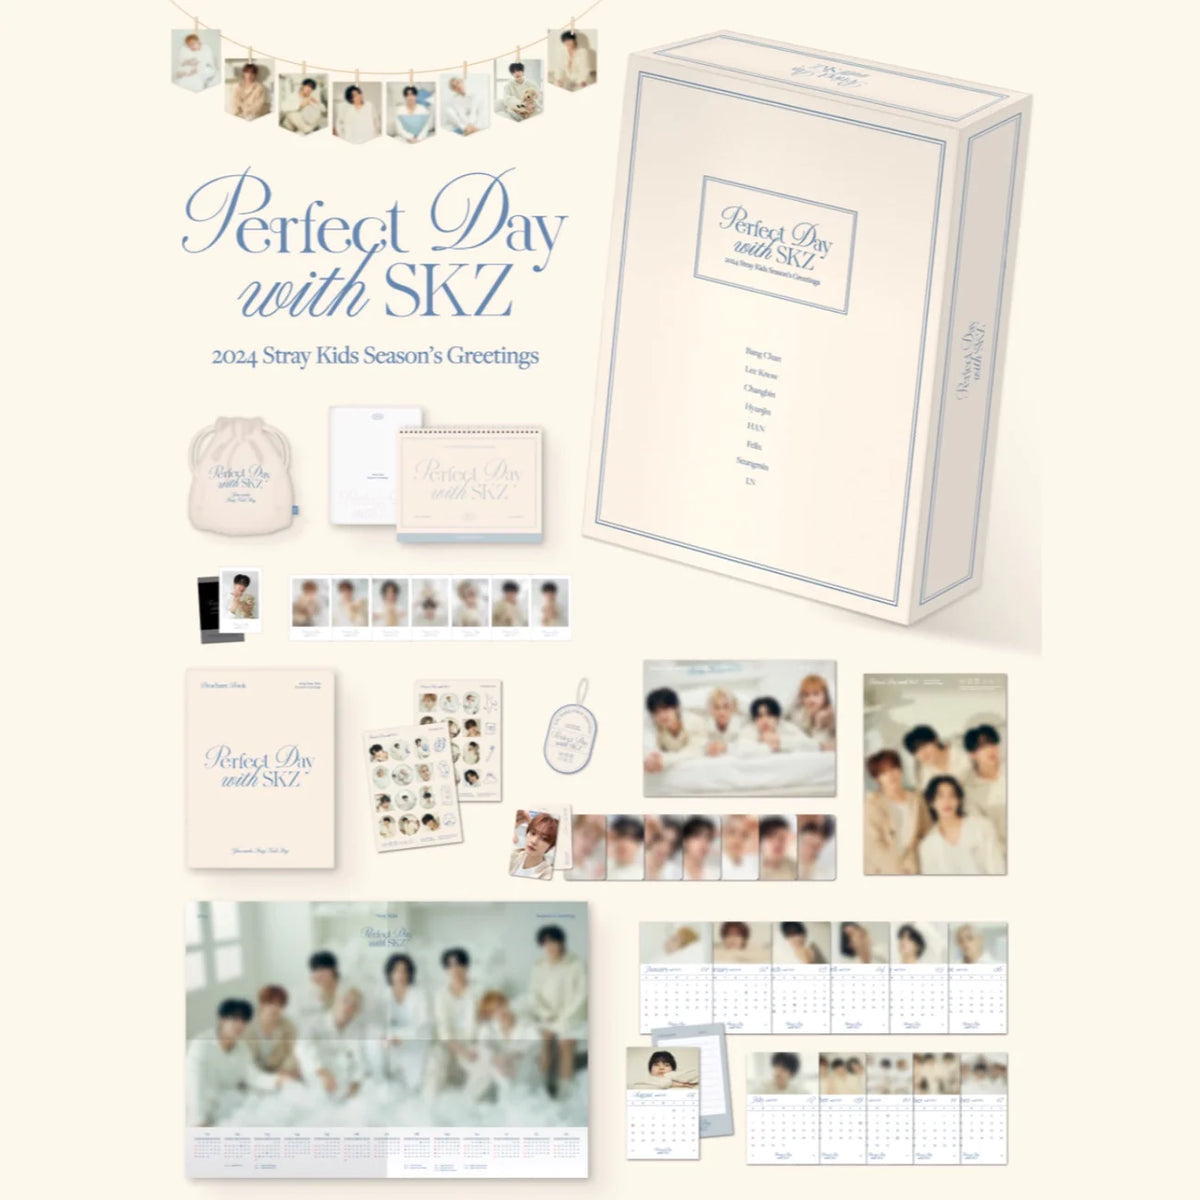 STRAY KIDS PERFECT DAY WITH SKZ 2024 Official Season's Greetings + P